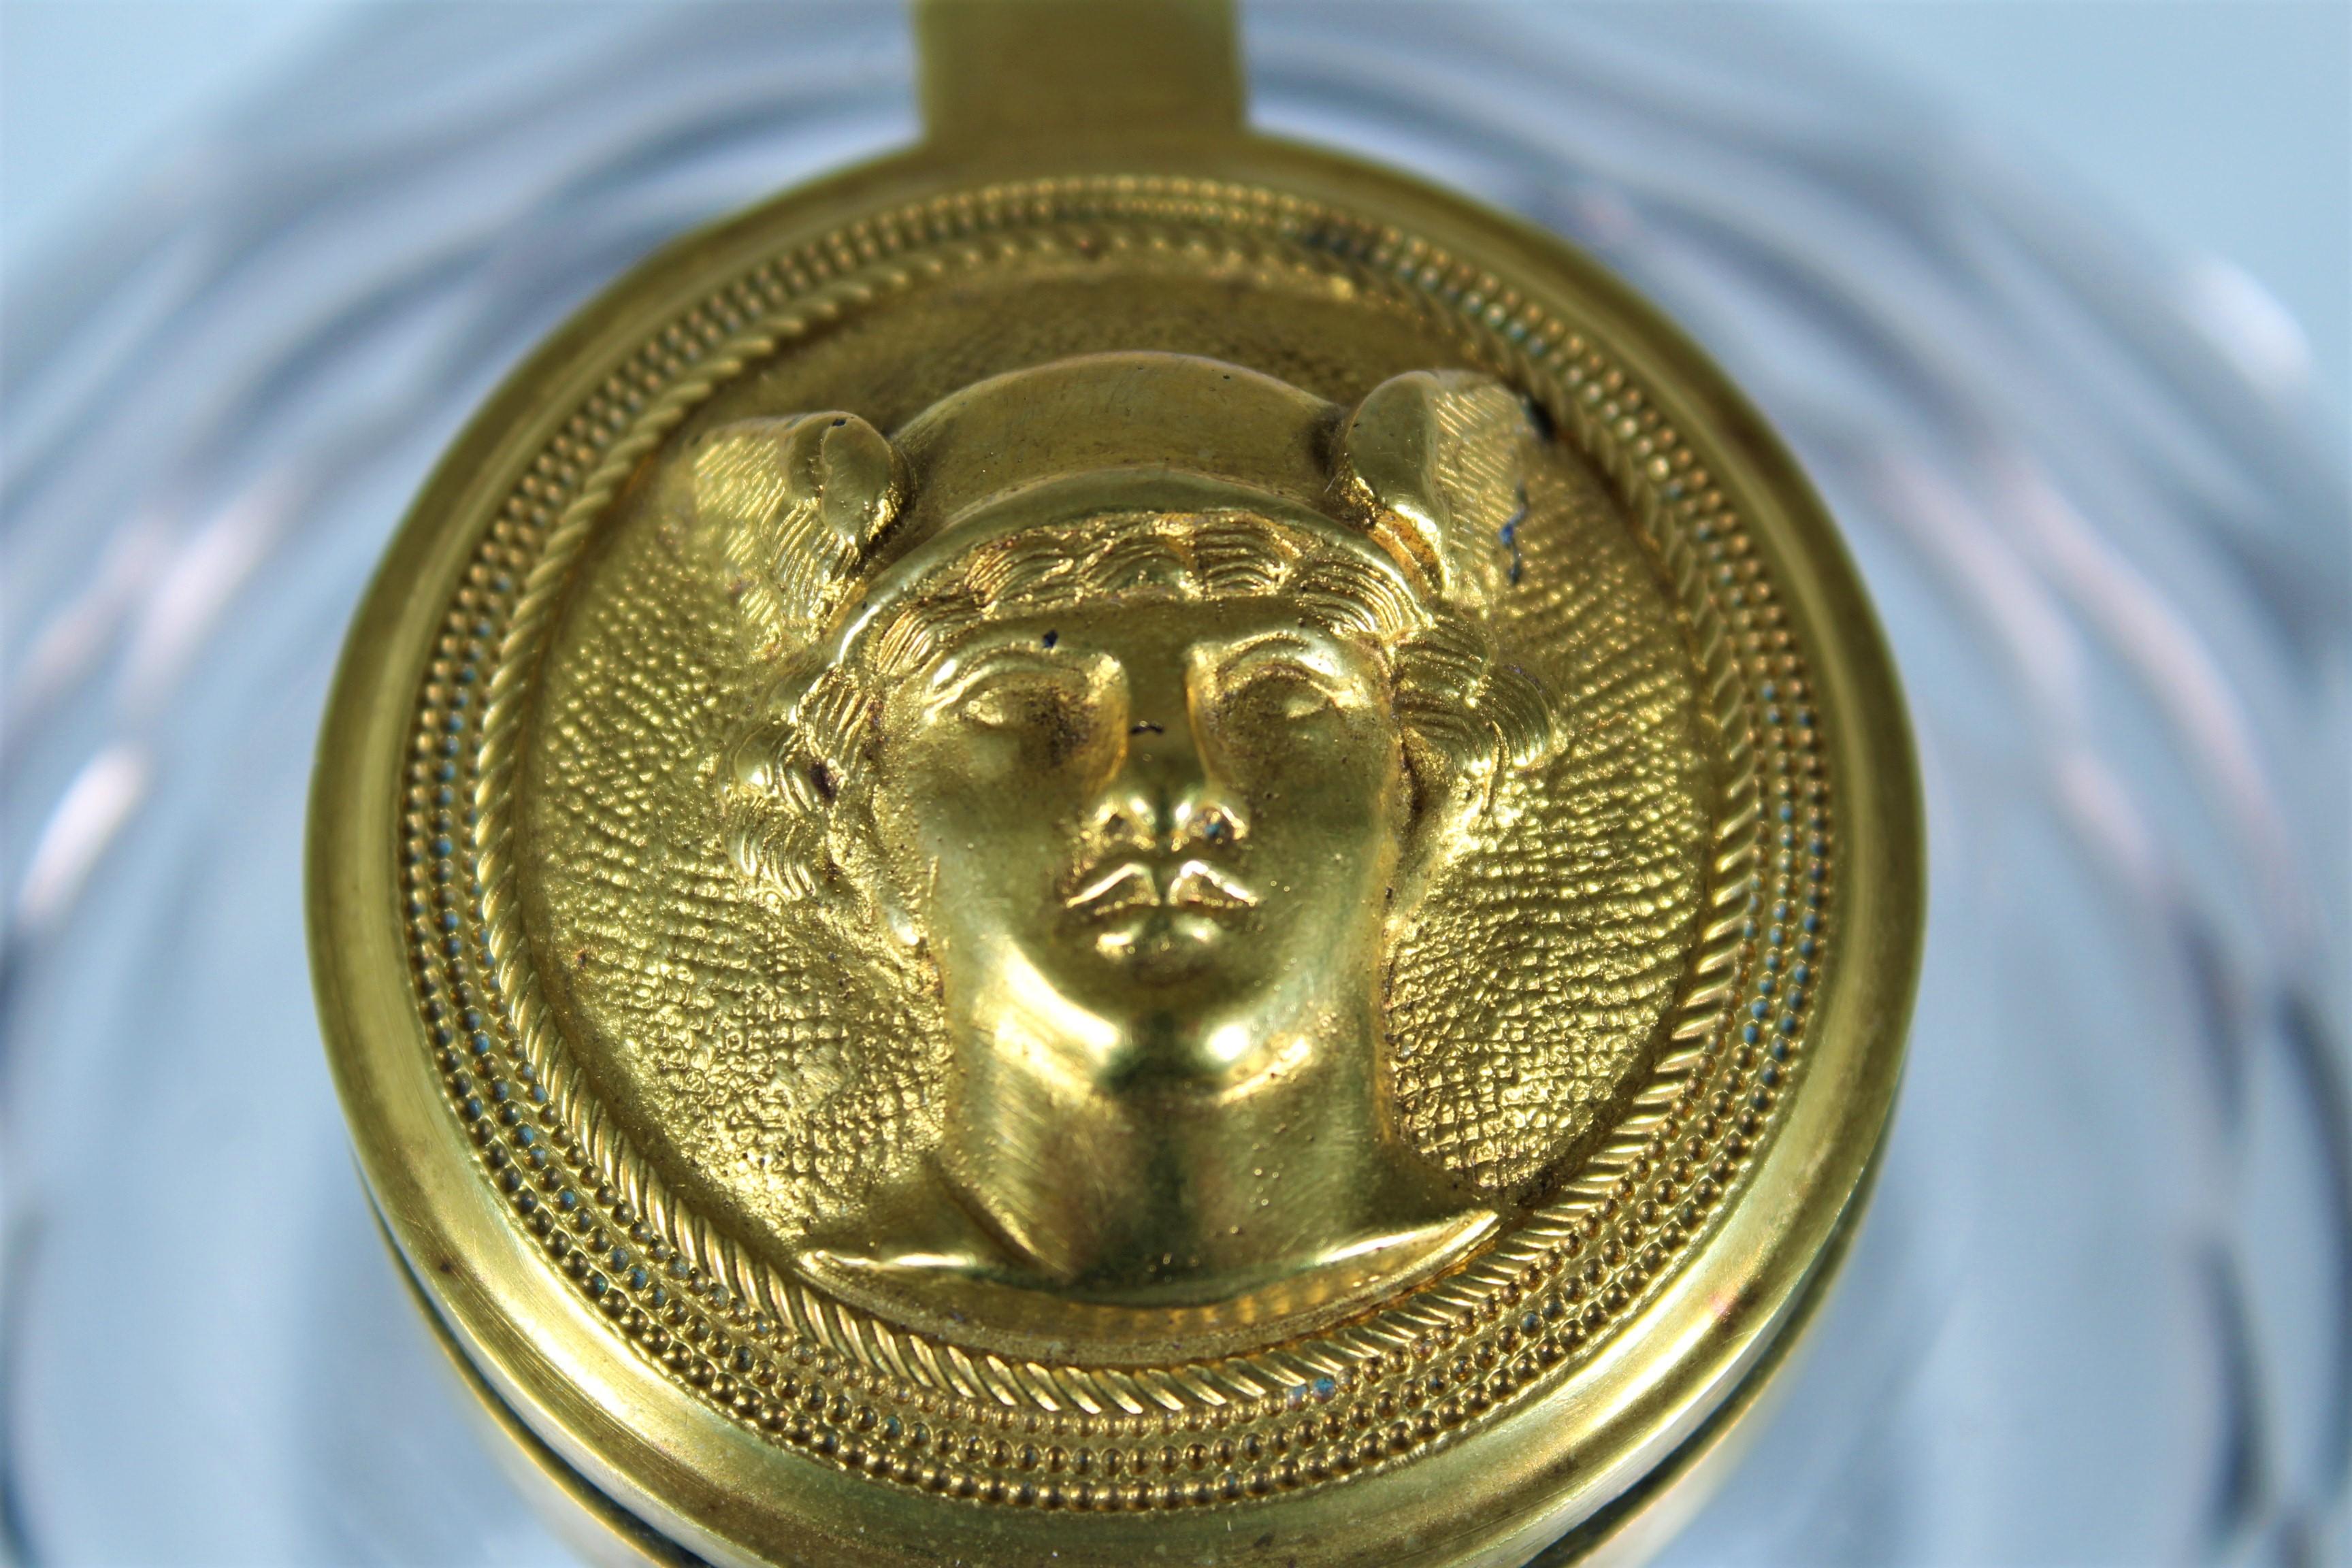 Beautiful inkwell made of heavy crystal glass, high-quality workmanship with a gold-plated lid.
The depiction of Hermes' head is finely crafted and in beautiful condition.







